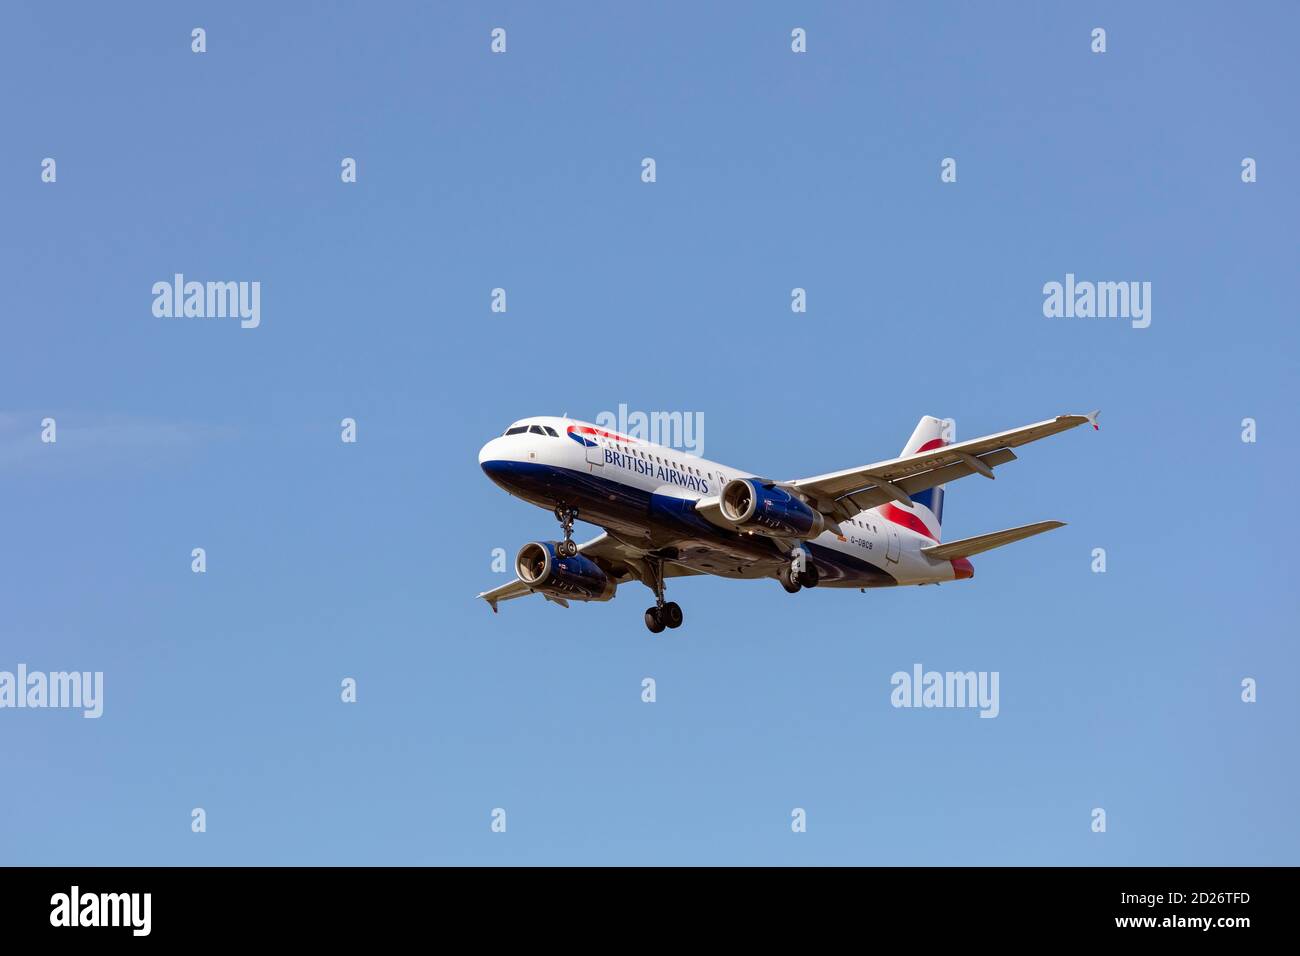 British Airways Airbus A319-100 with landing gear down. Stock Photo